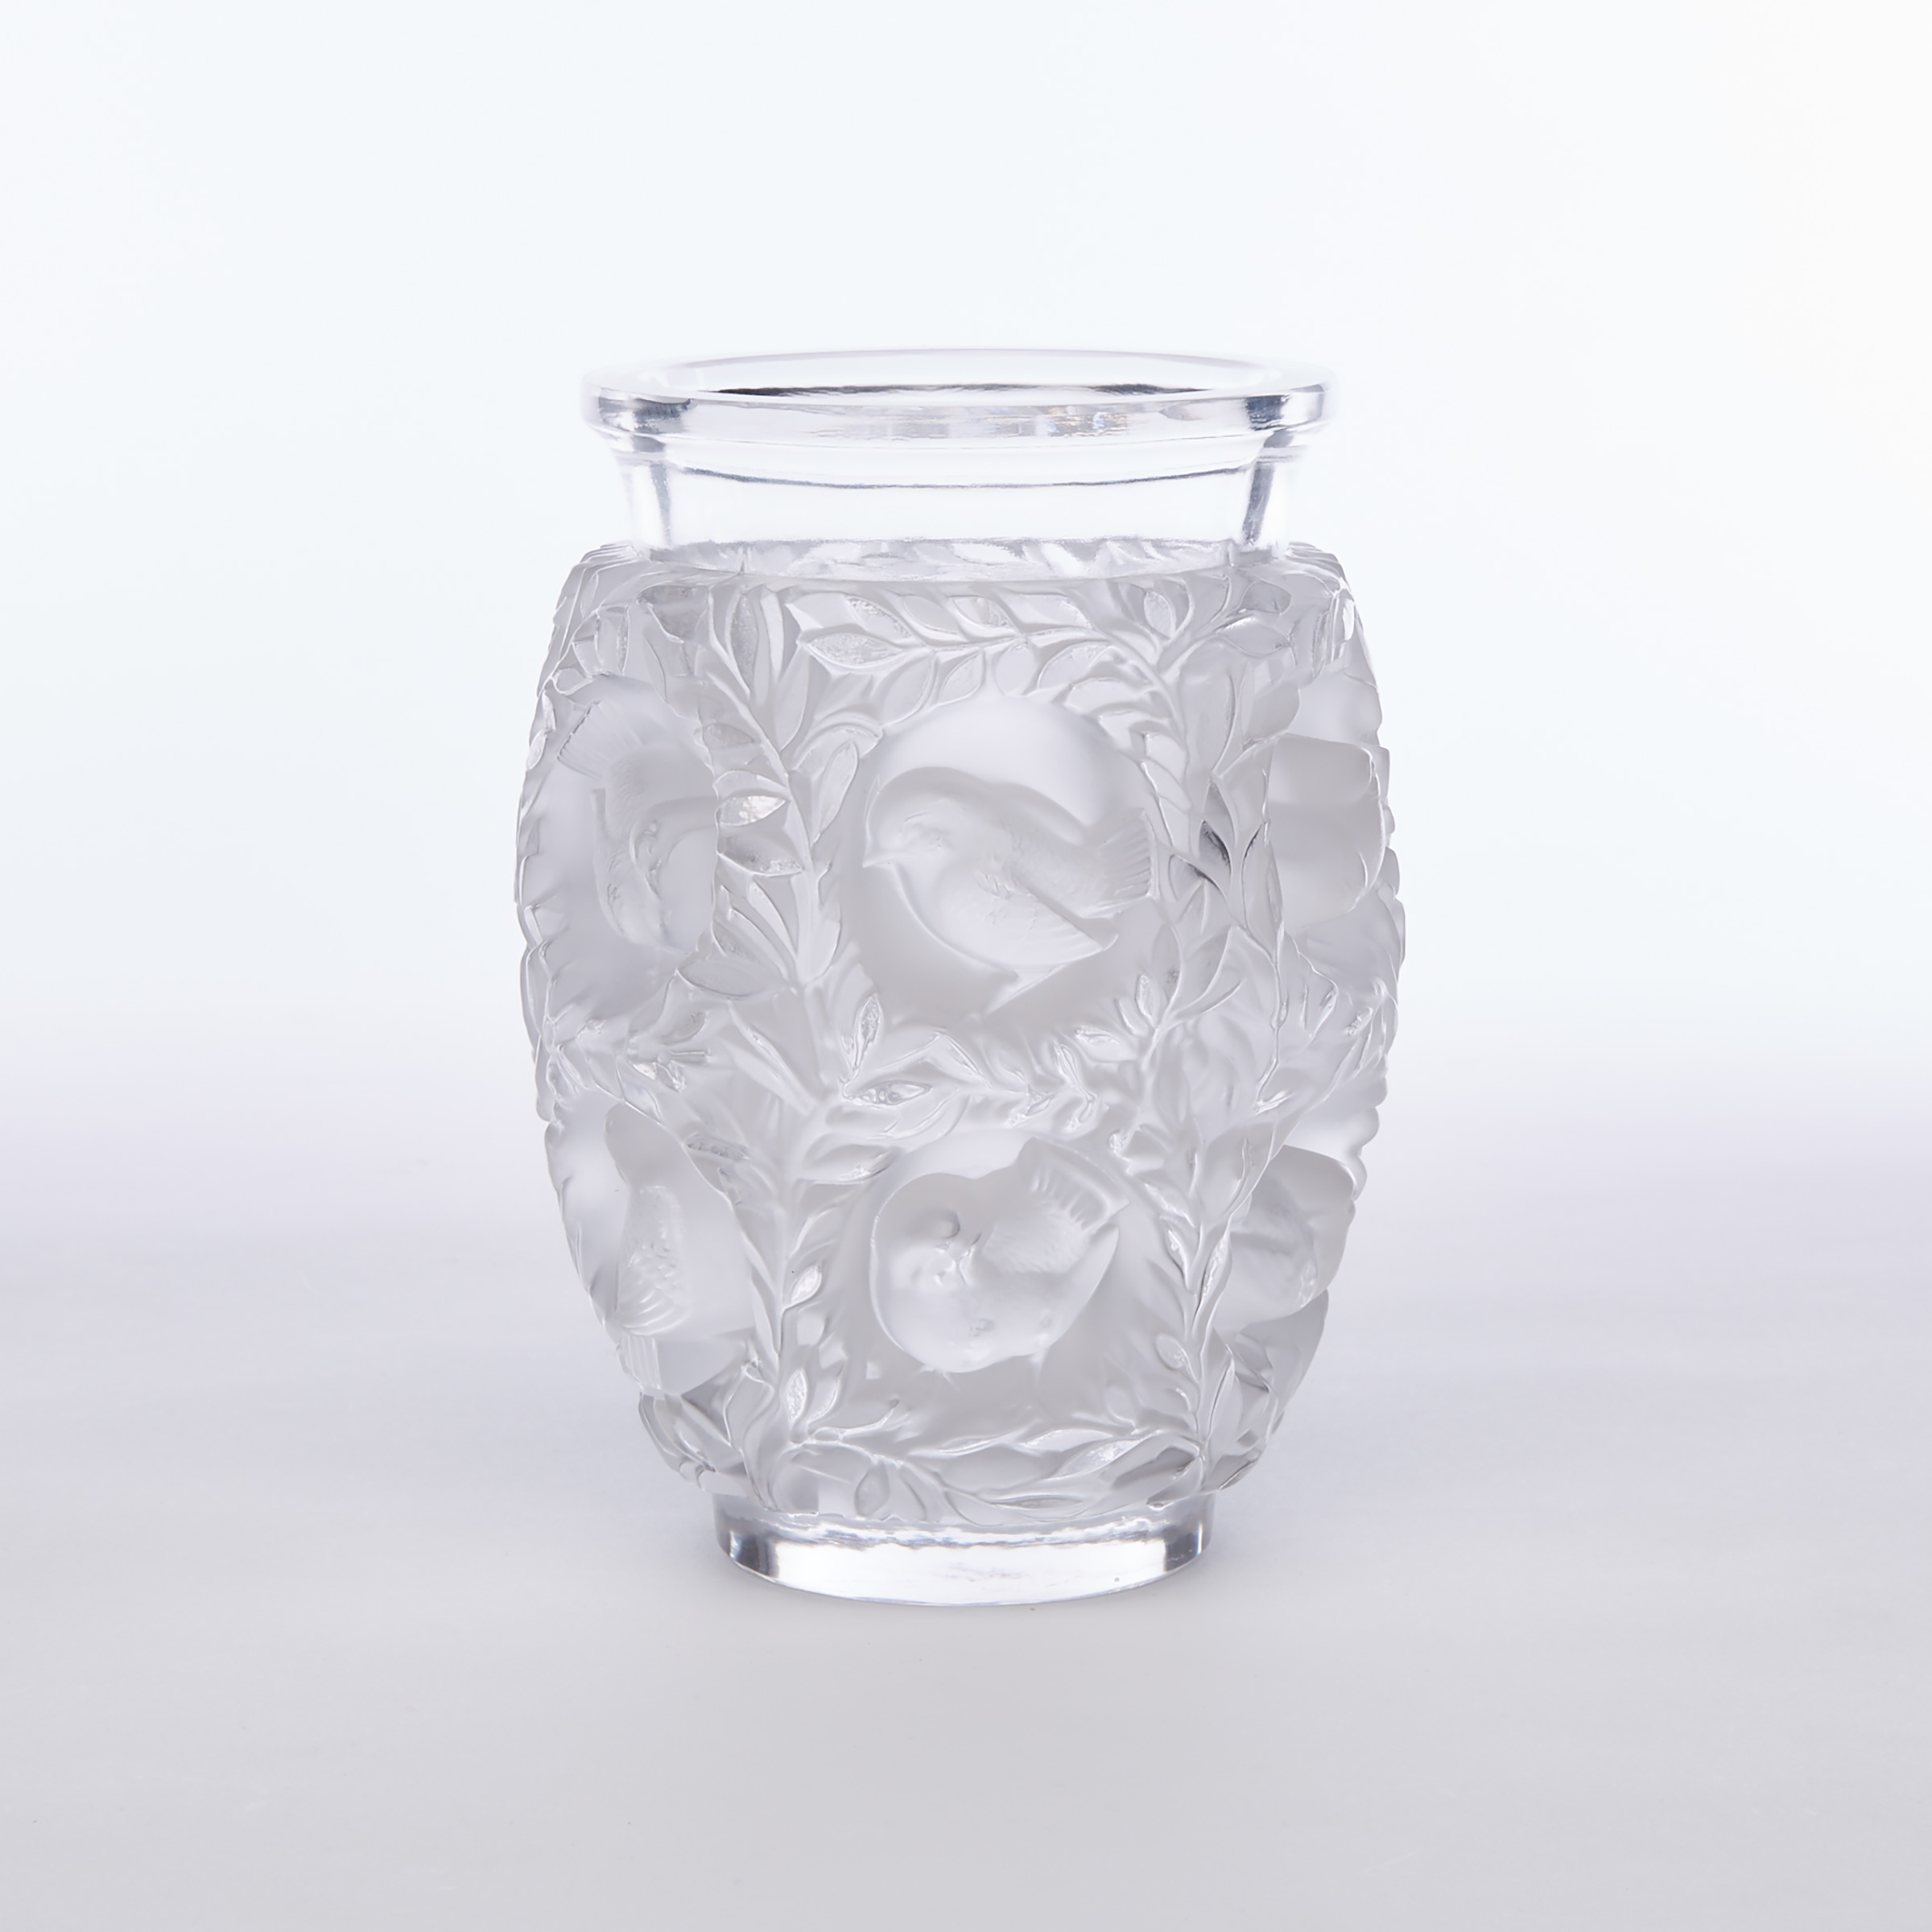 ‘Bagatelle’, Lalique Moulded and Frosted Glass Vase, post-1945